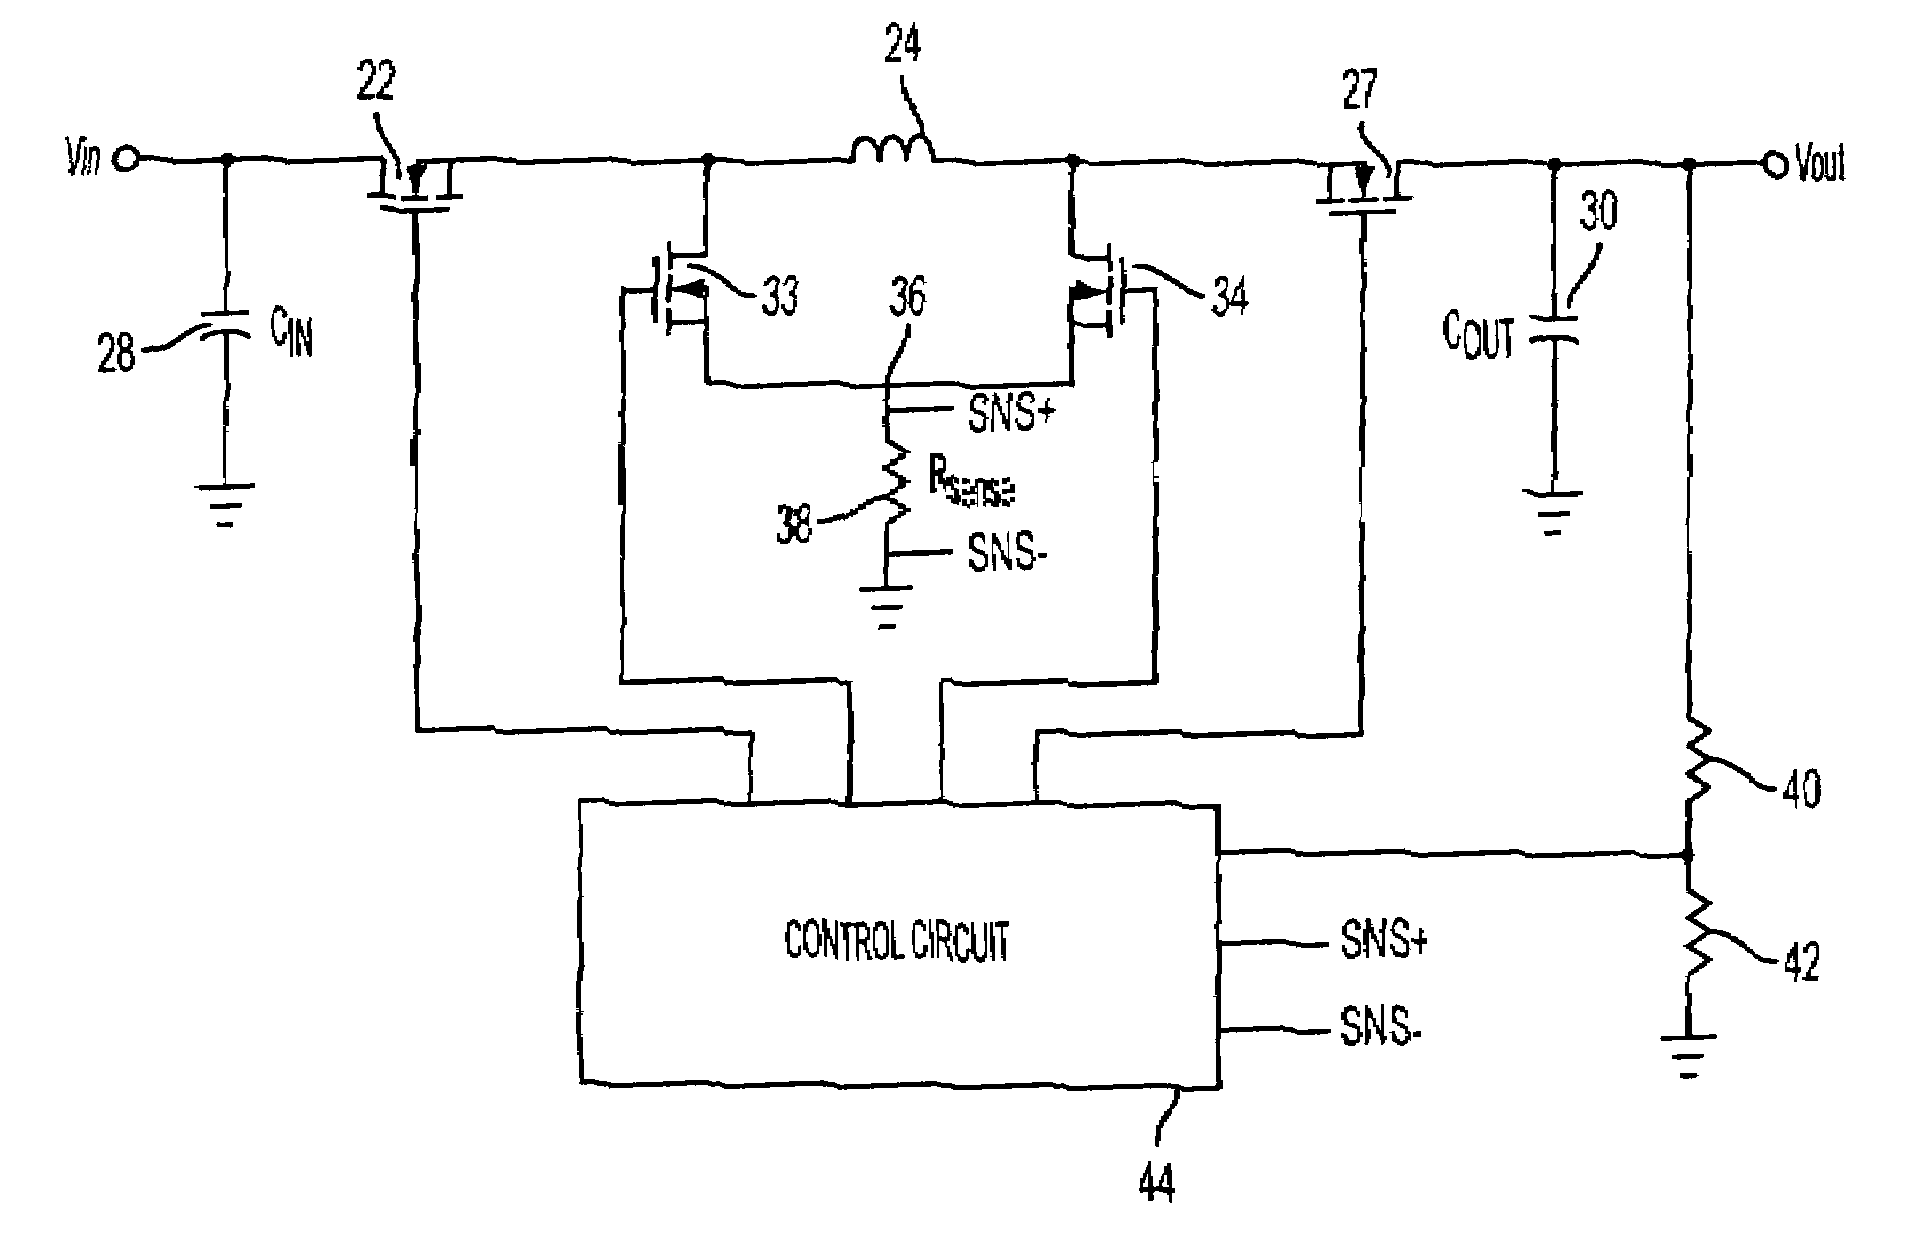 Current-mode control for switched step up-step down regulators